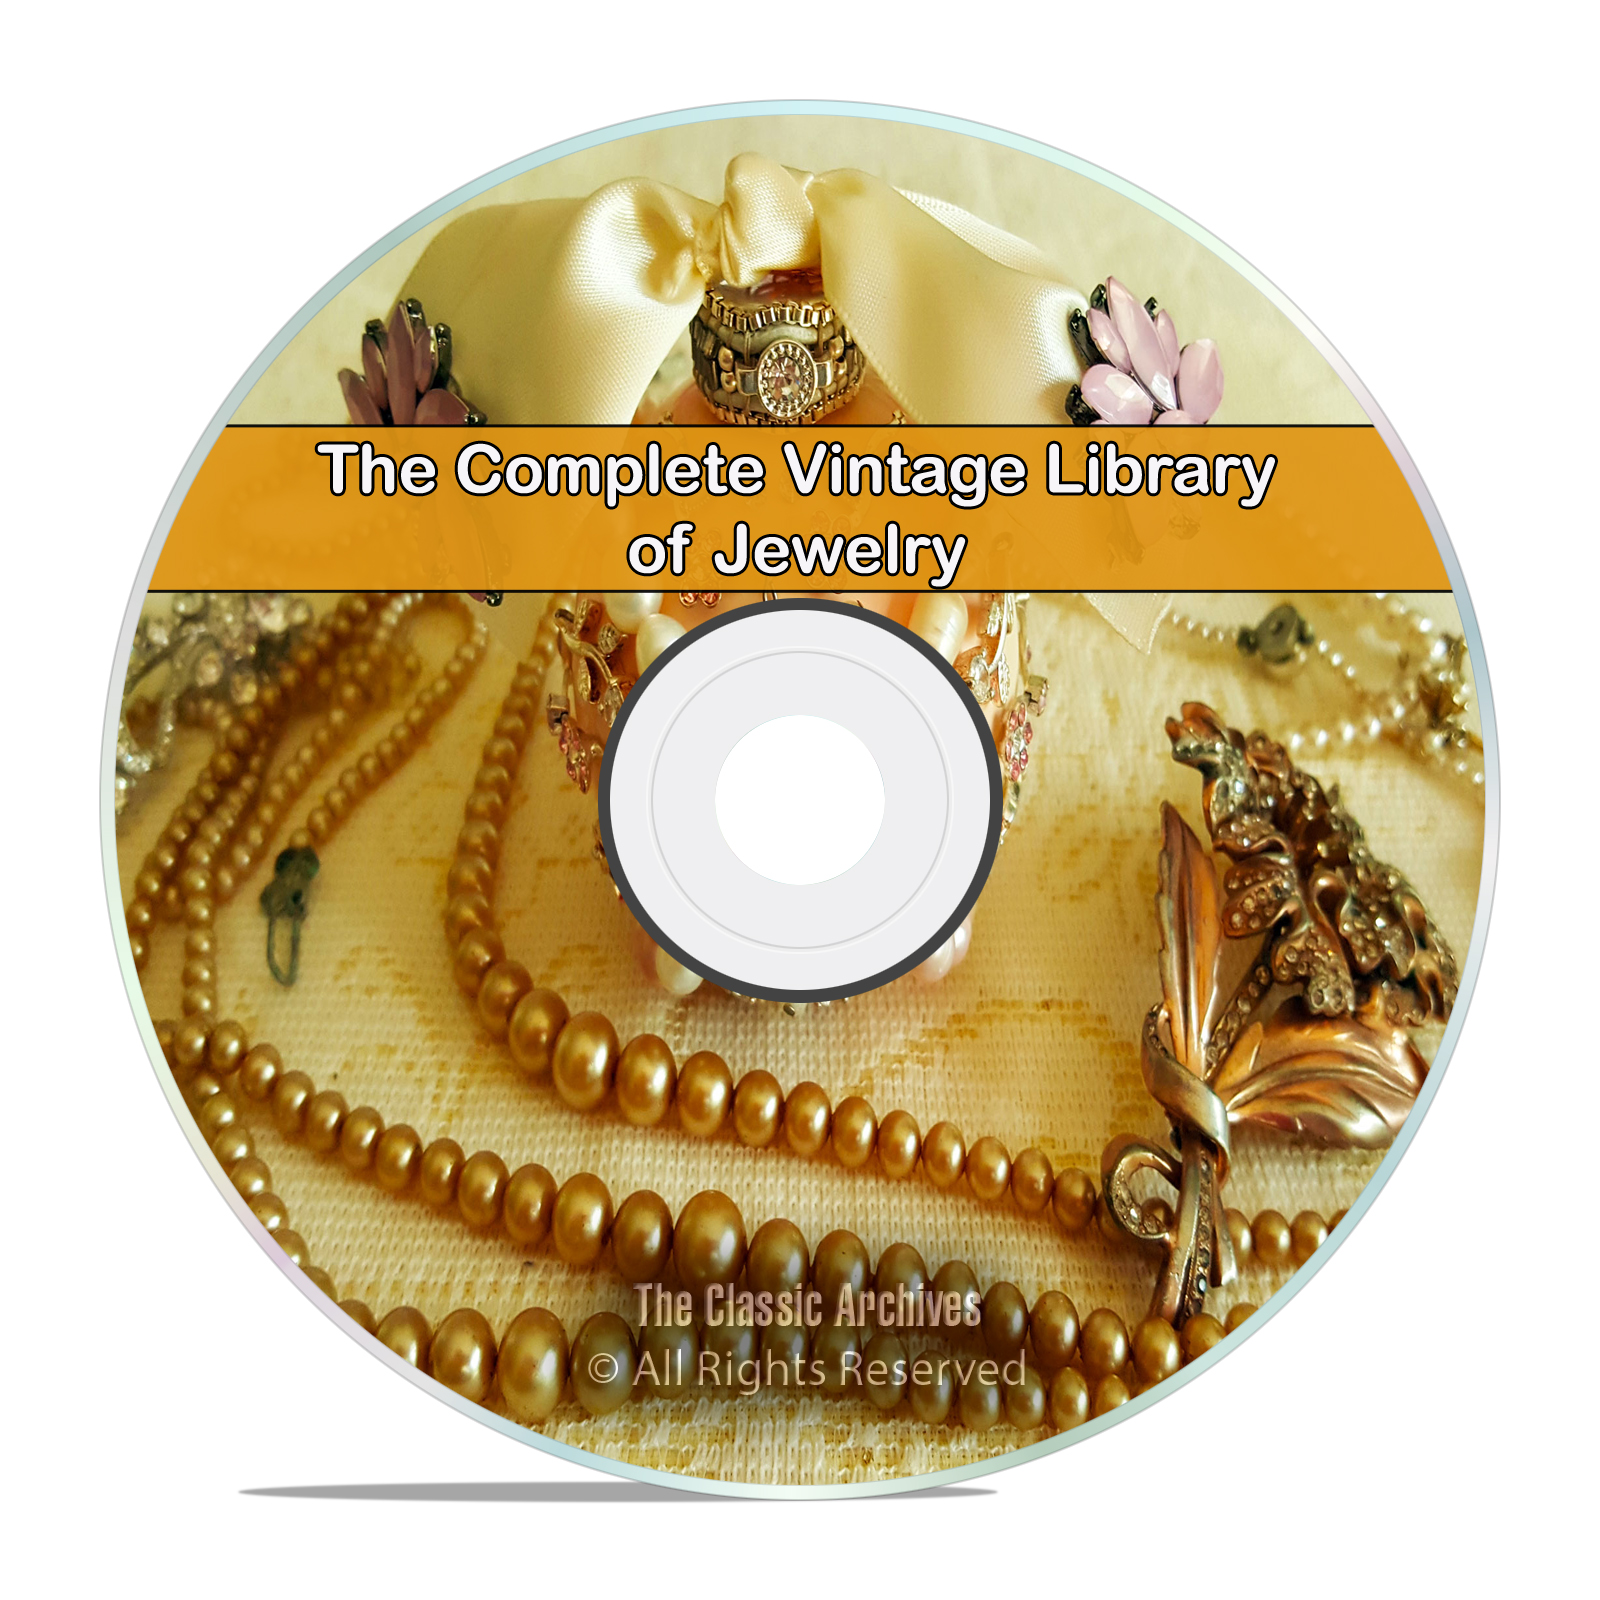 Library of Jewelry, 75 Books, Catalogs, How to Make Gold Silver Stones DVD